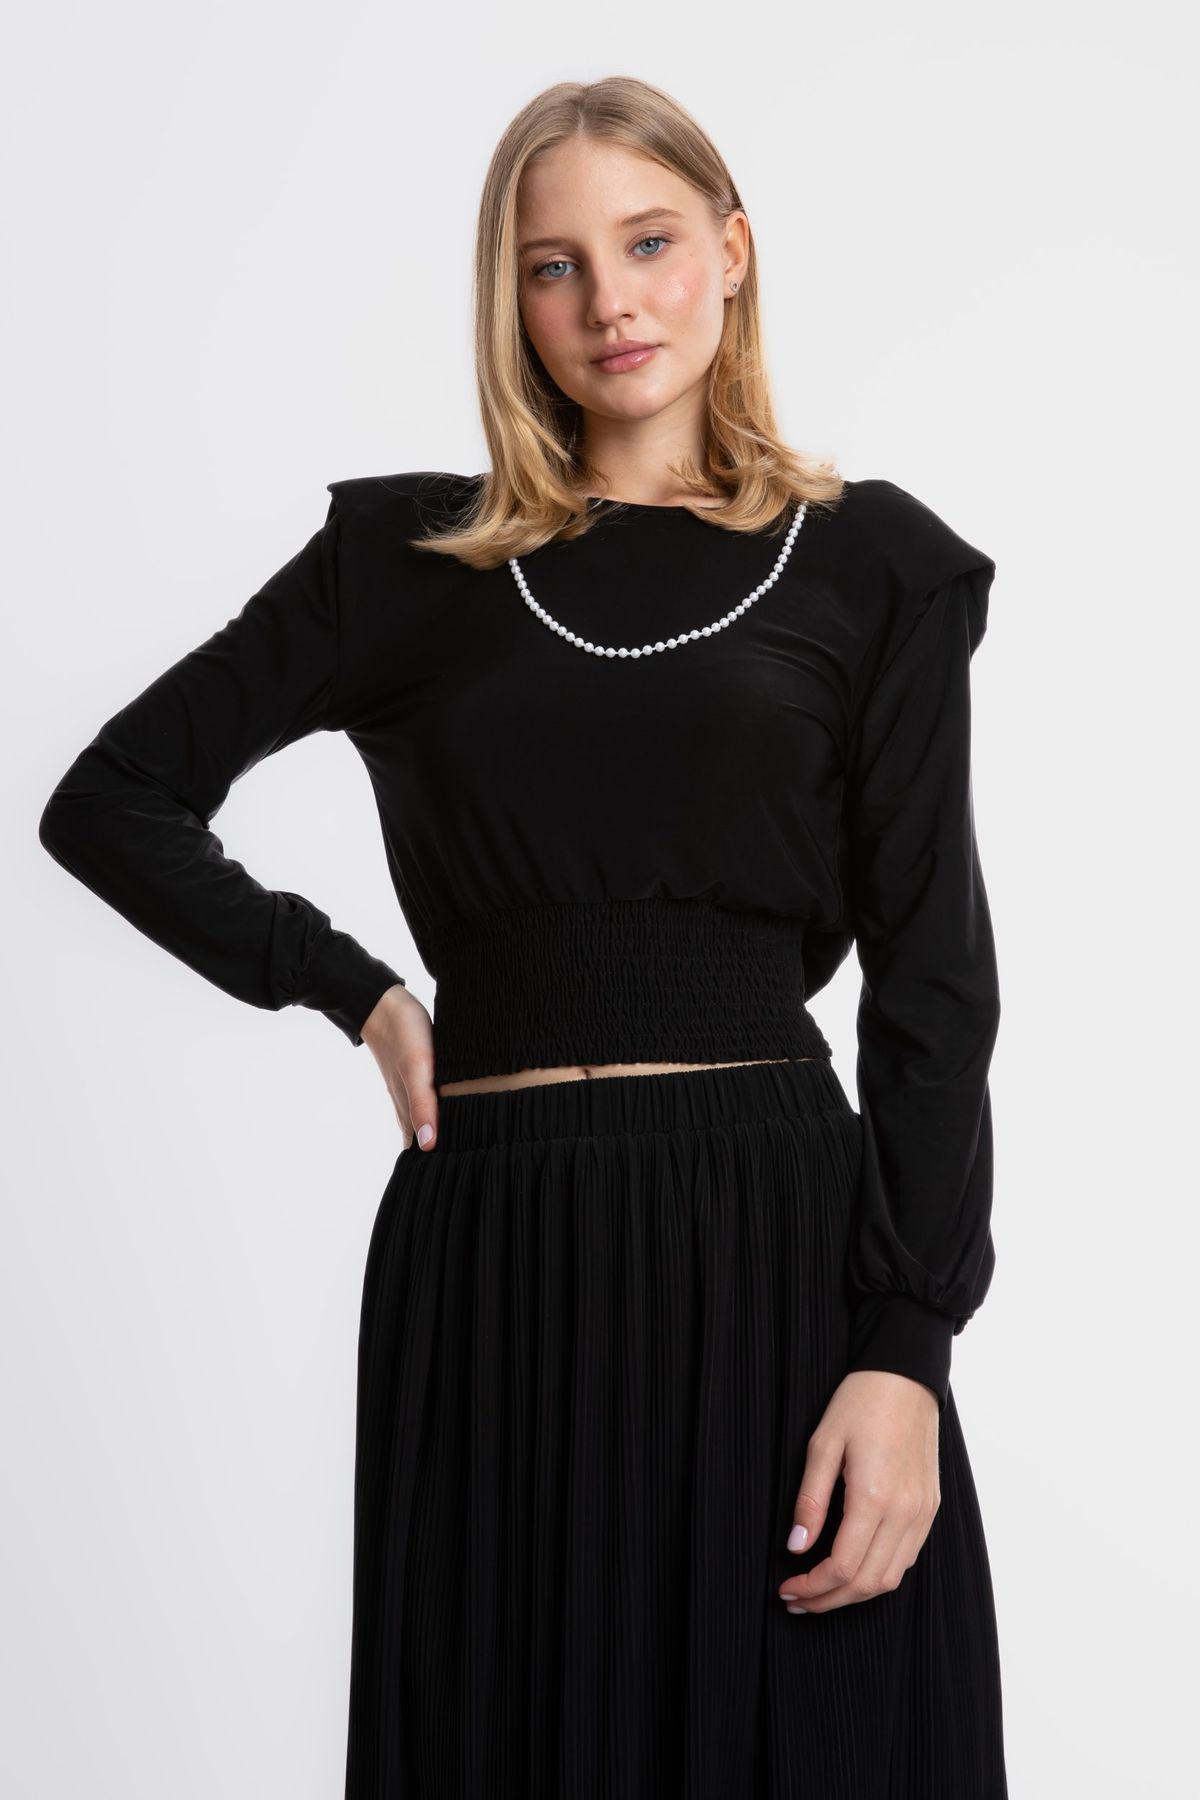 Boat Neck Slinky Fabric Blouse with a Pearl Detail on the Neckline